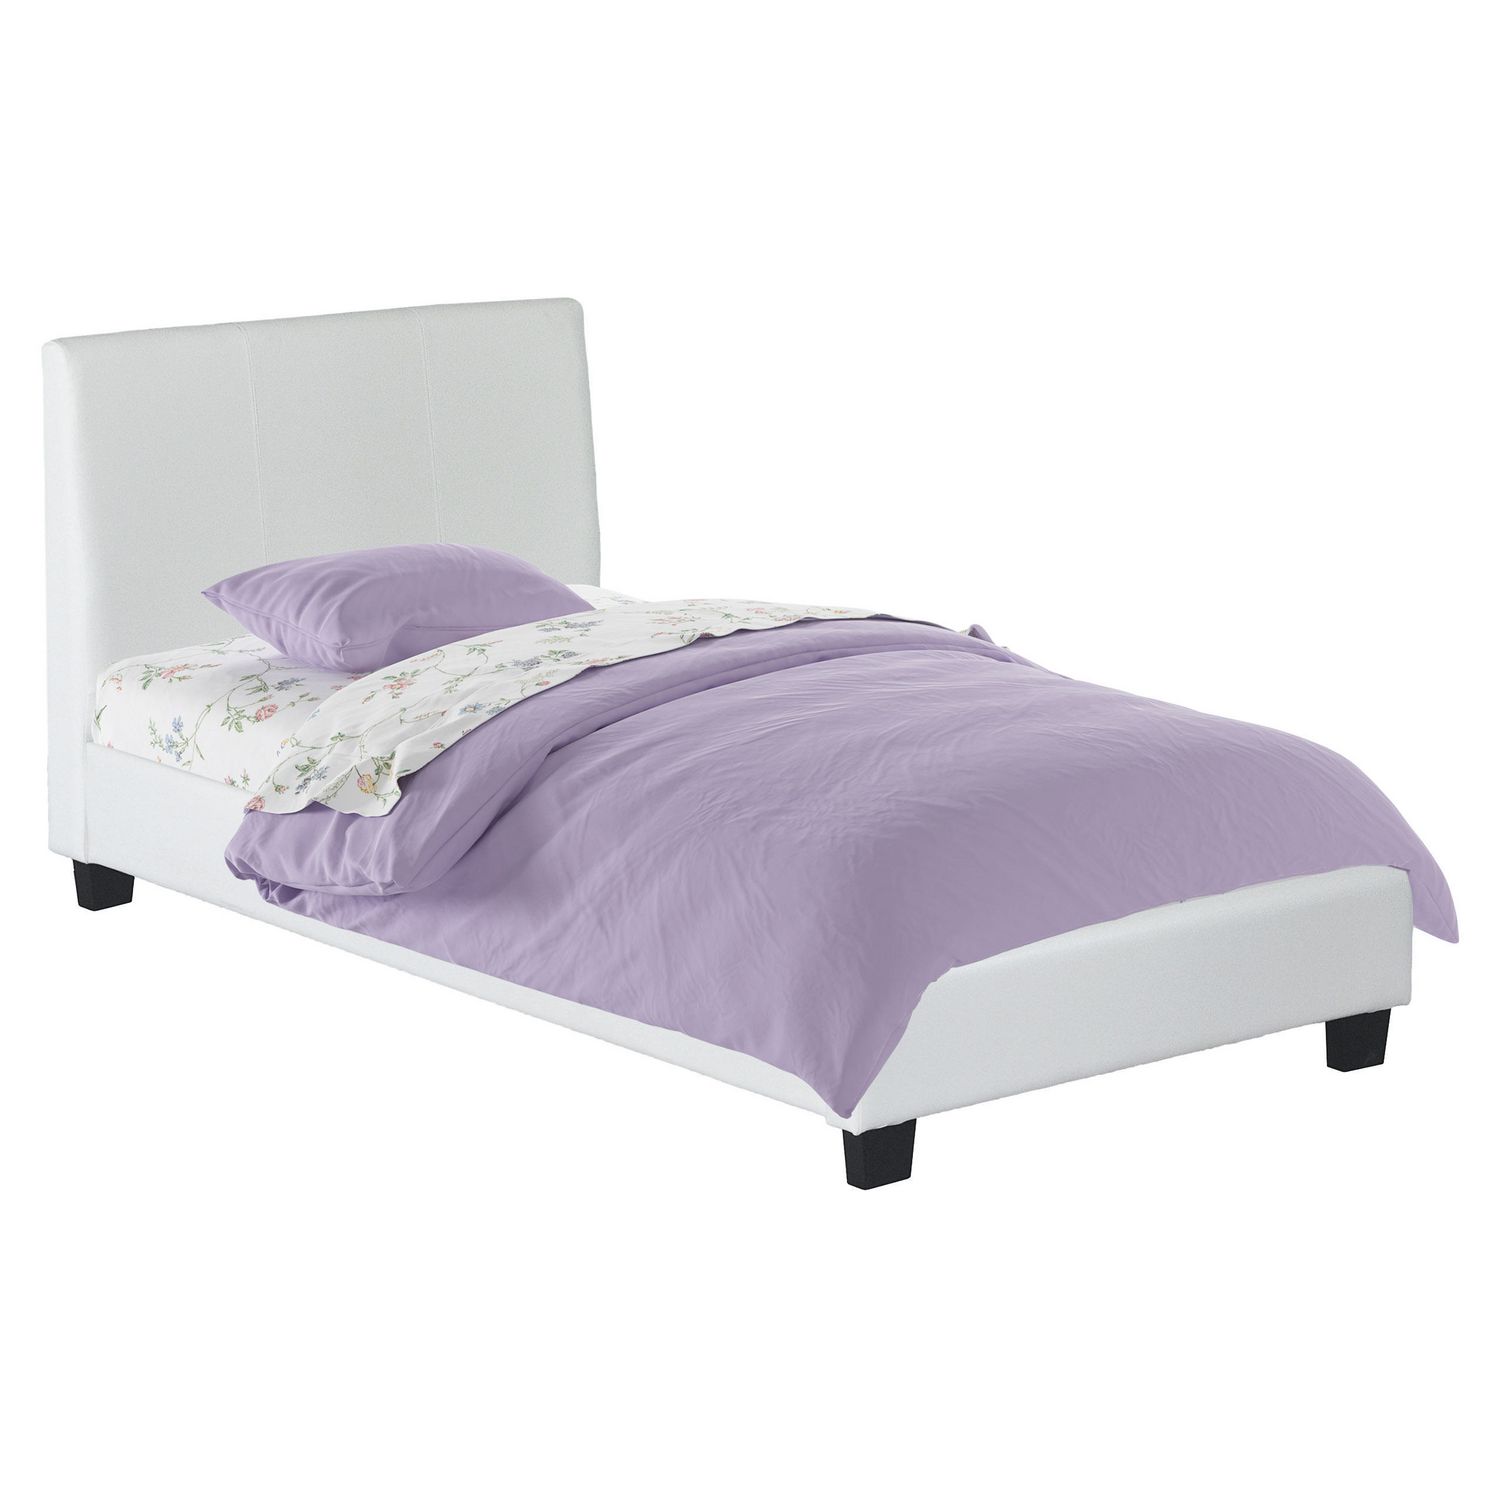 Corliving San Diego Collection White, San Diego Bed Frame